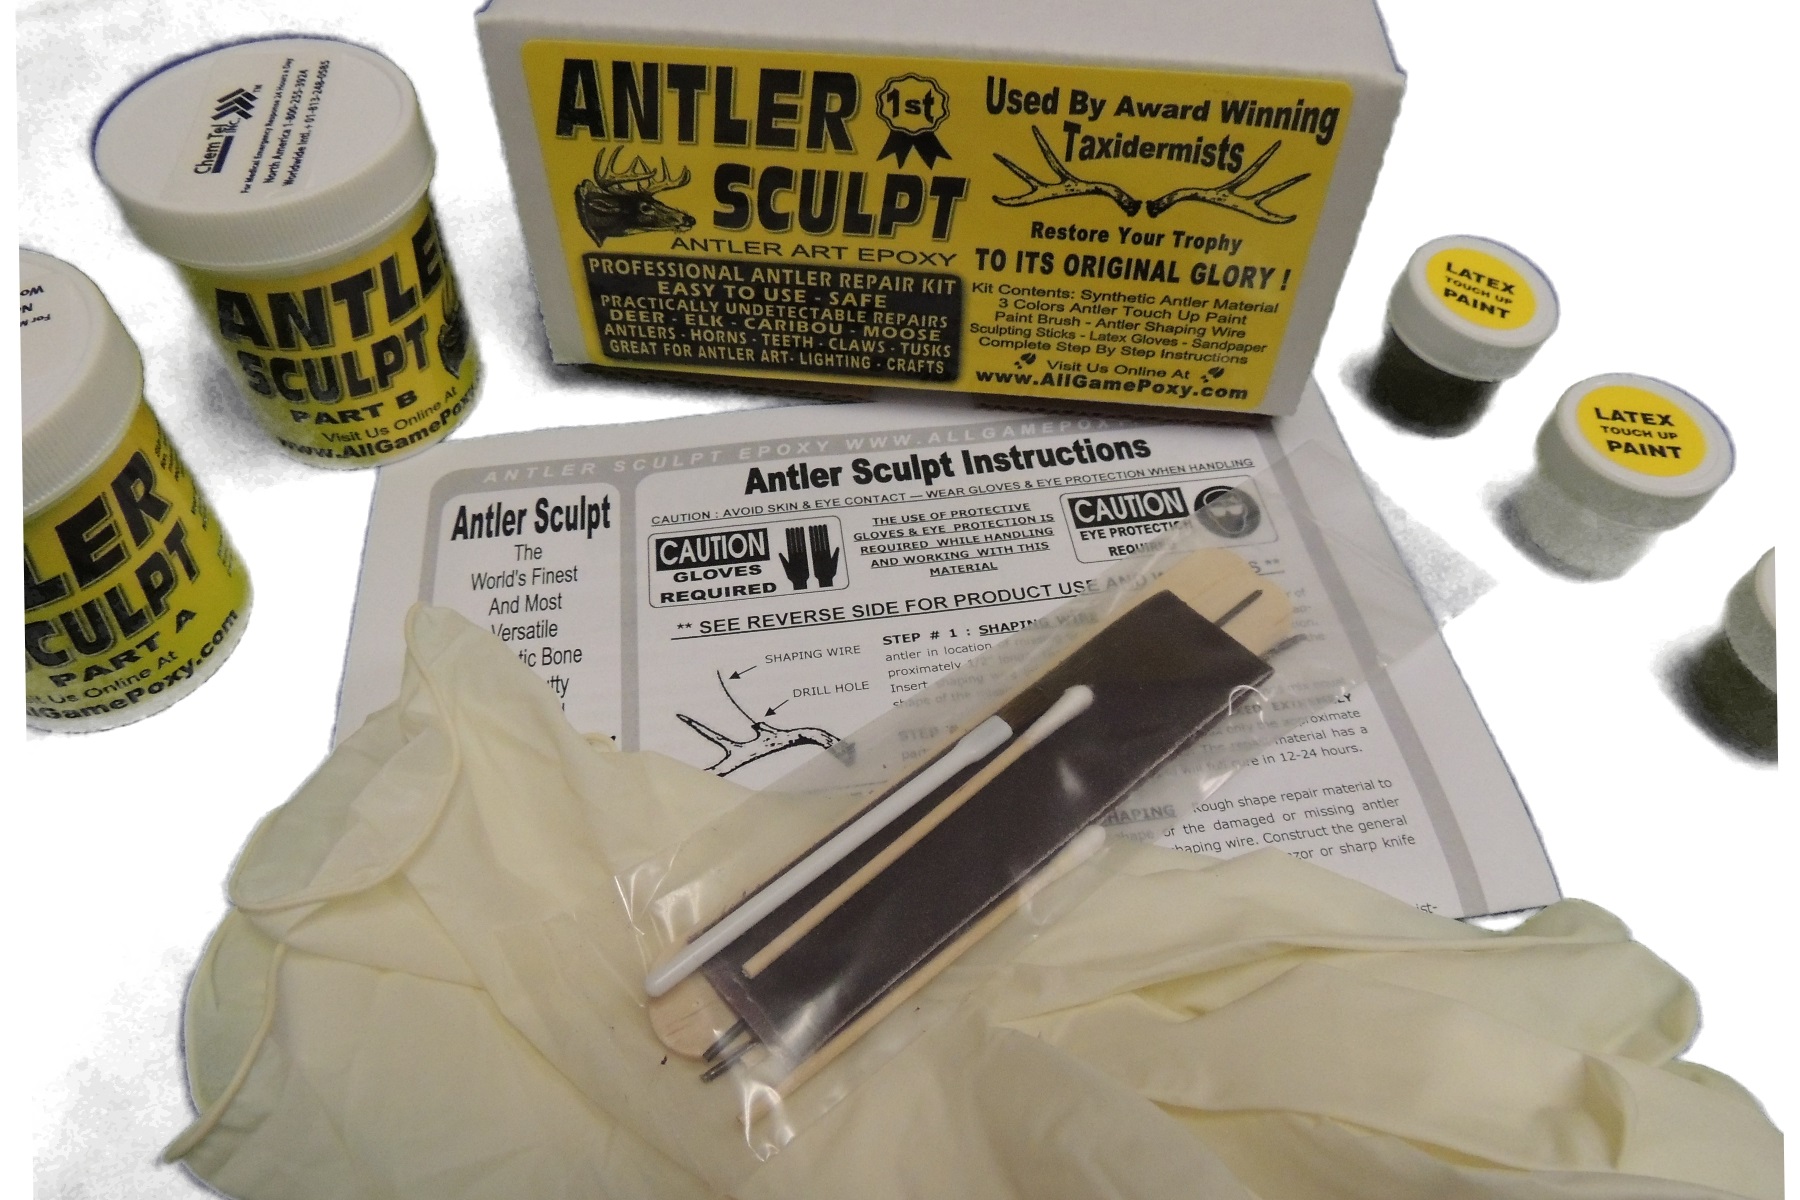 All-Game Antler Sculpt Antler and Horn Repair Kit  By All-Game Epoxy  Easy to Use KIt Comes Vomplete With All You Need To Make Professional  Repairs To You Trophy Antlers!